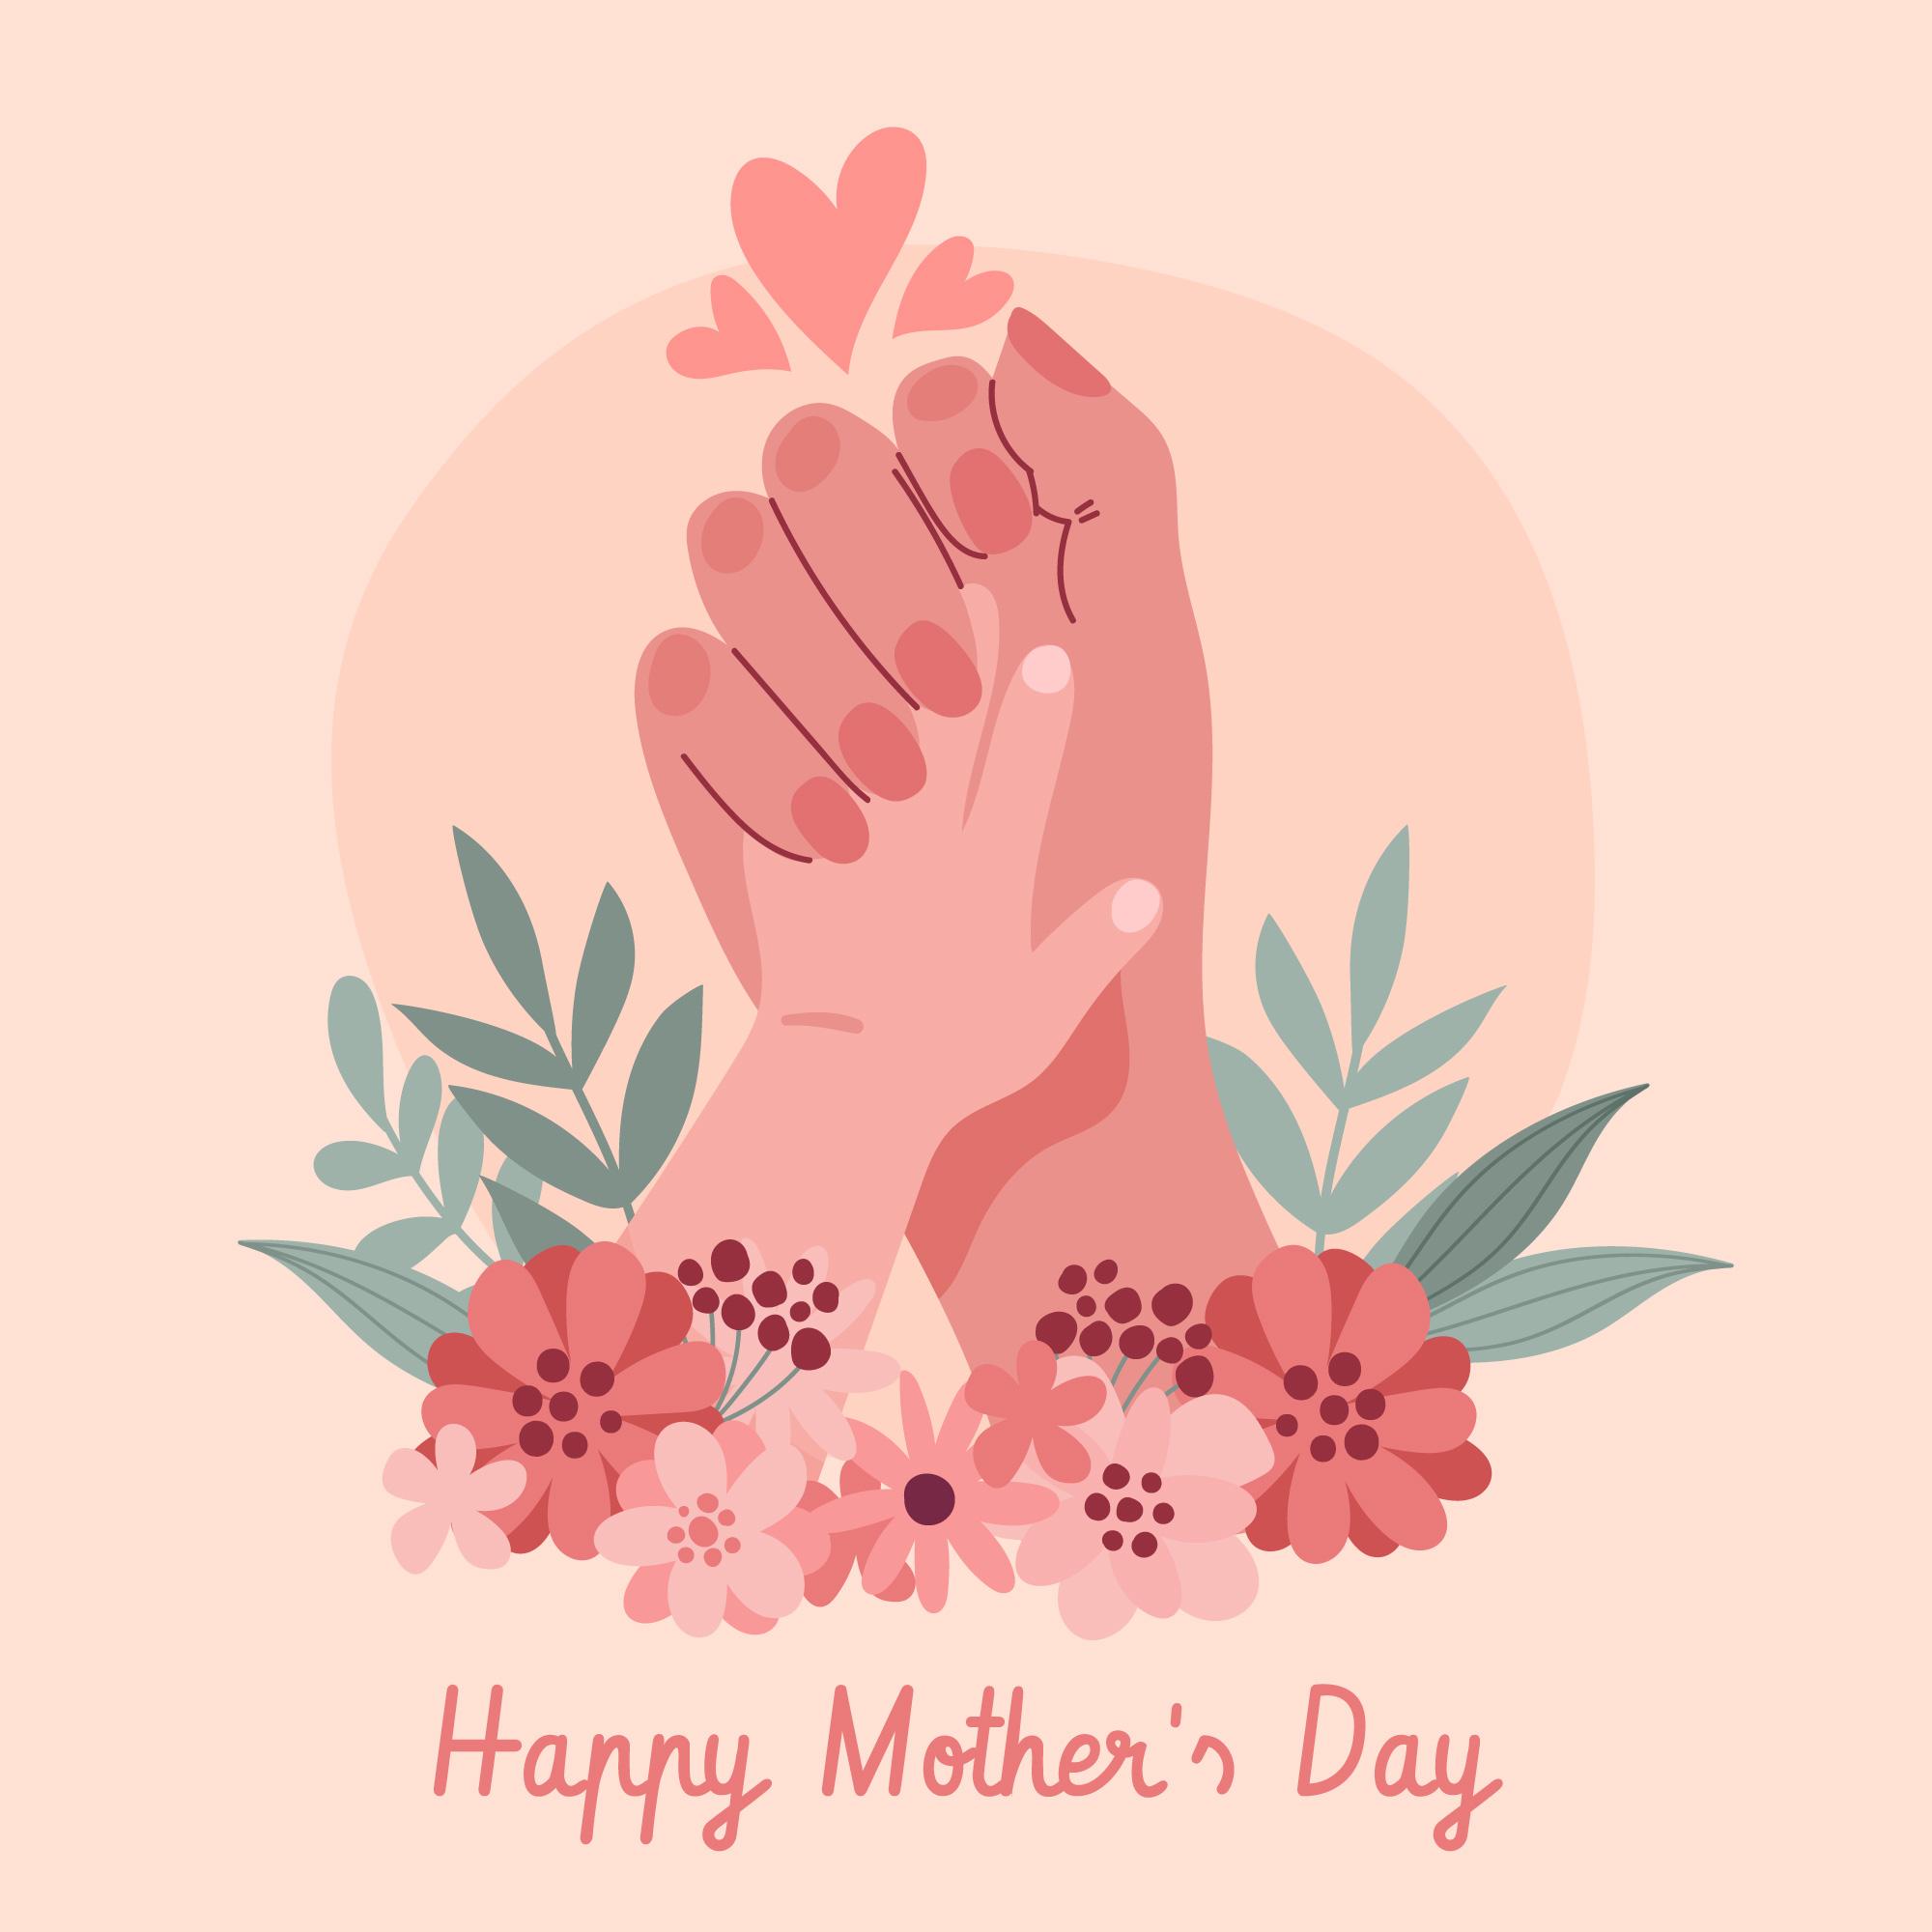 Mother's Day 2021 Wishes, Images, Messages, Greetings, and Quotes from Daughter to share with Mom, Mother-in-Law, Friends Mom